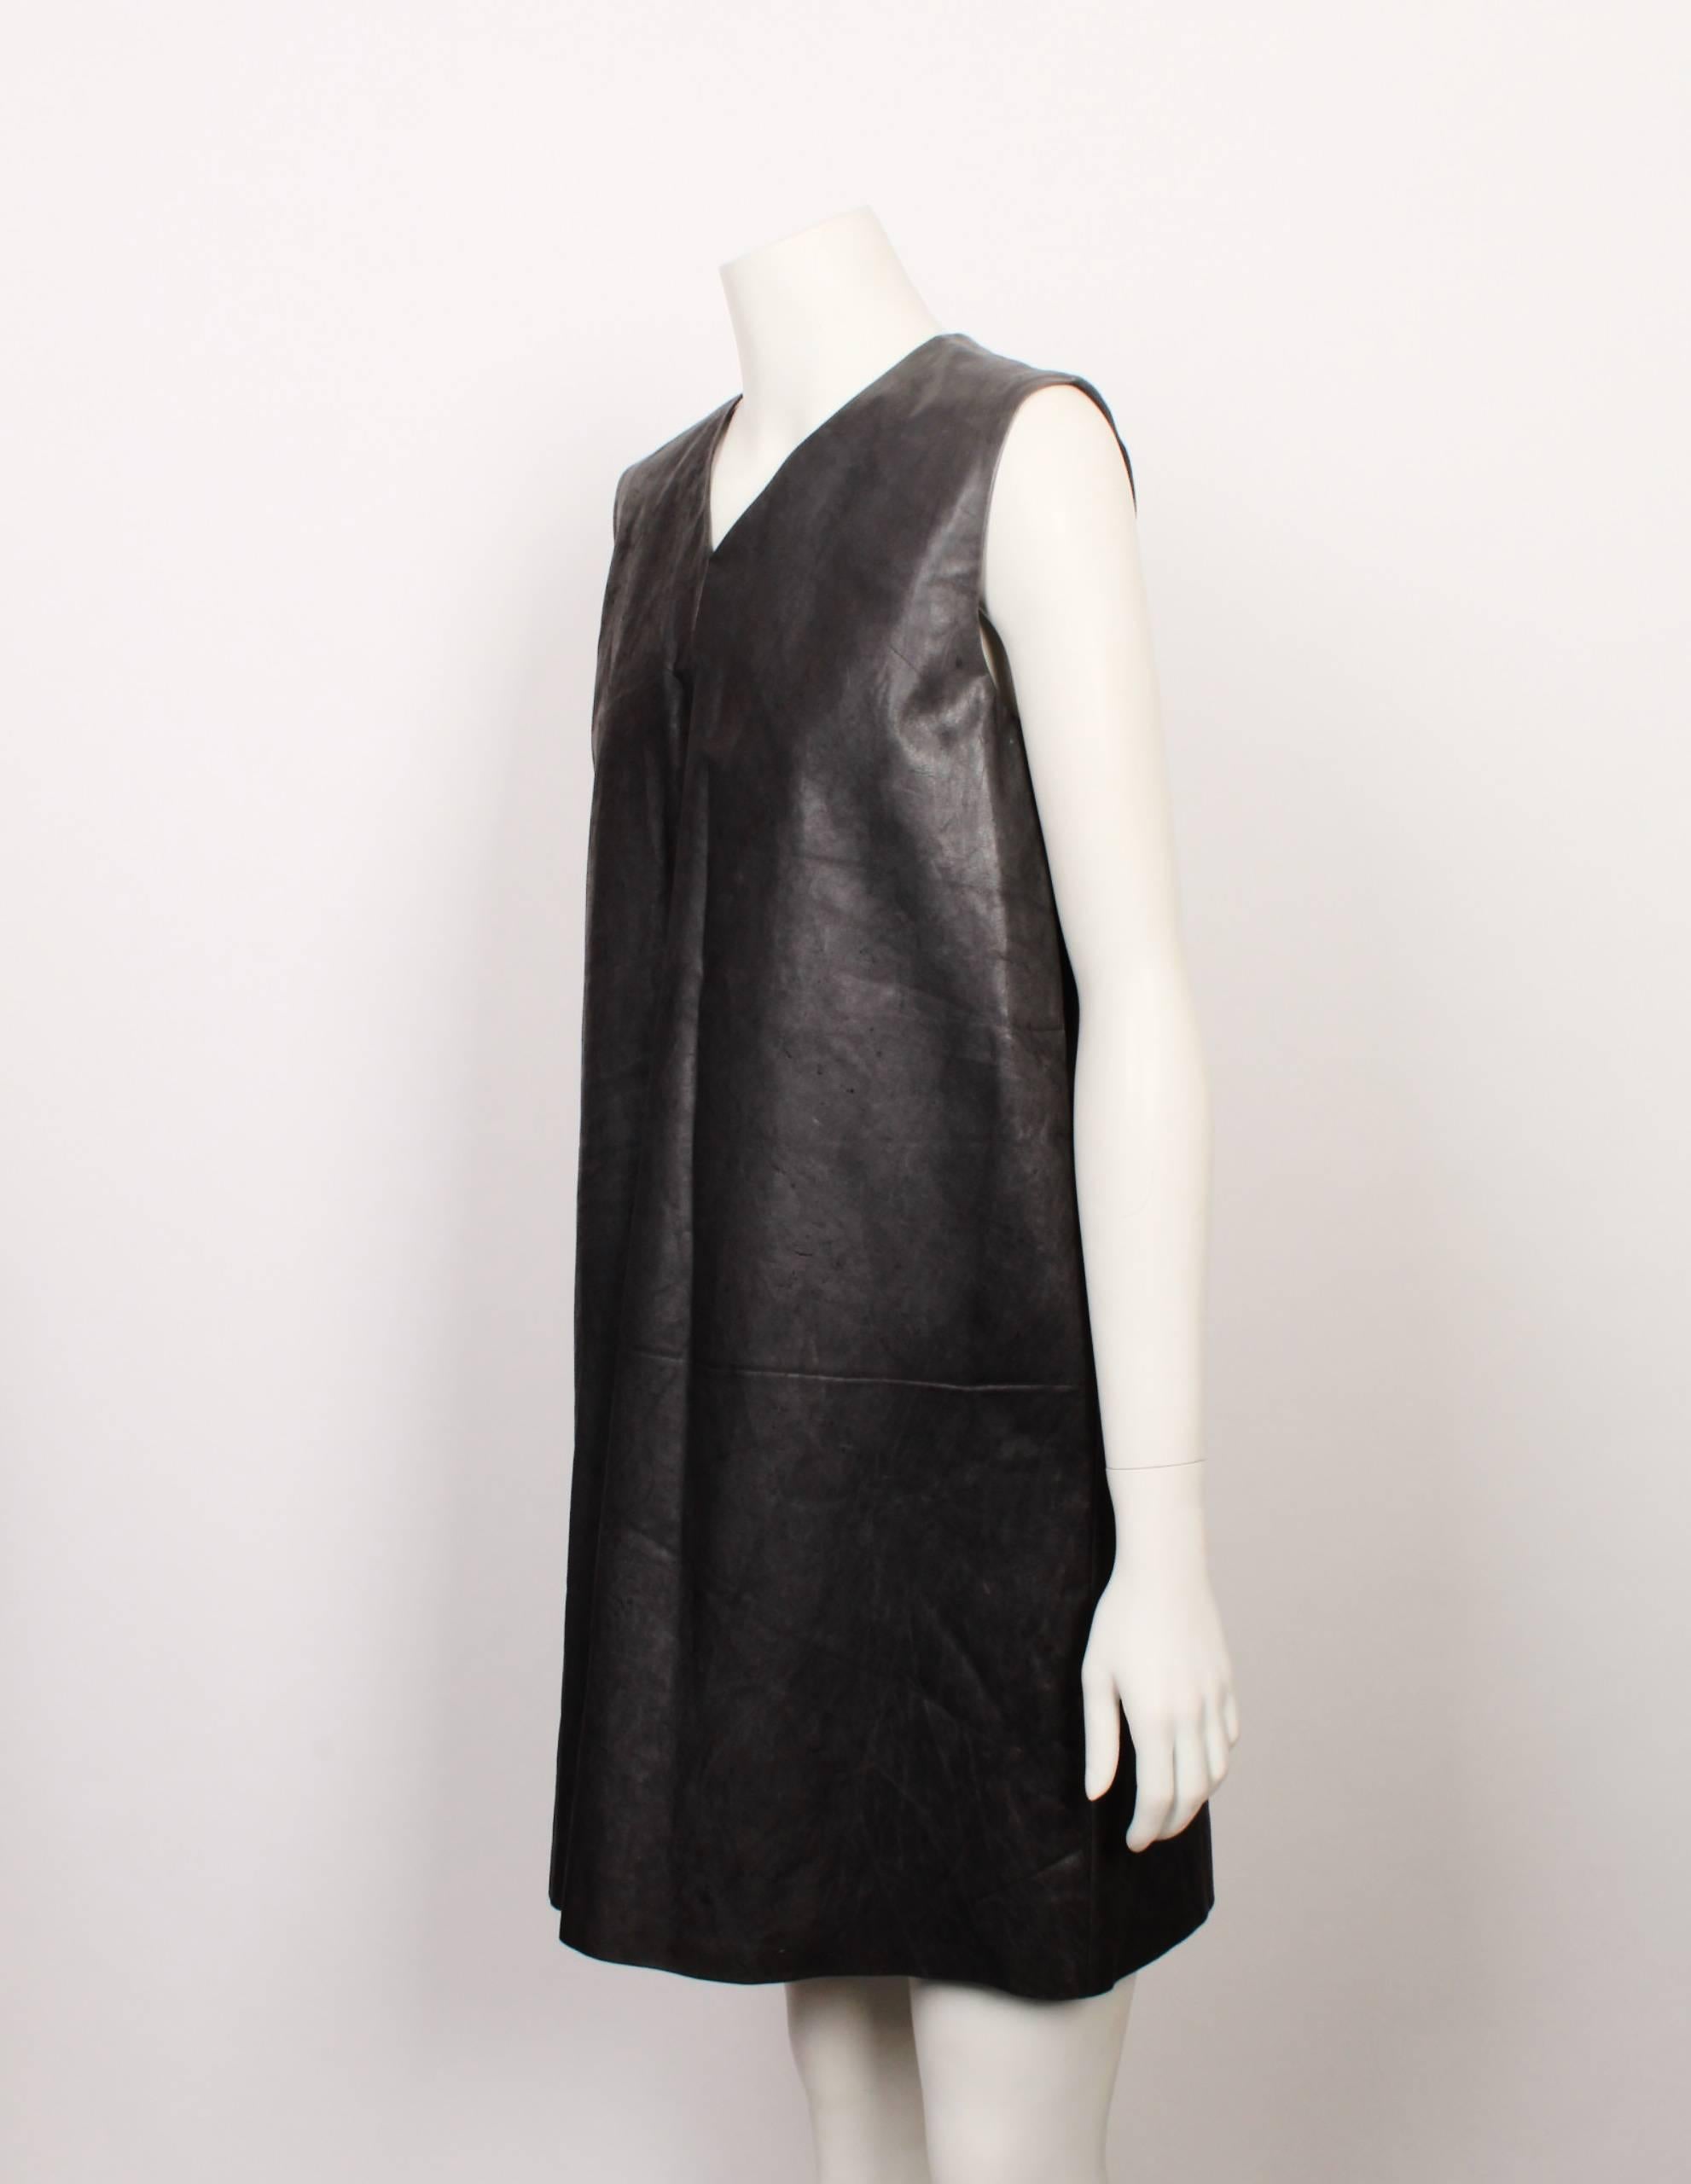 Grey Leather Smock Dress

Poell’s cult following is a direct result of his uncompromisingly designed garments,  full of experimental fabrics and rigid in construction. He has almost exclusively occupied the intersection between bespoke menswear